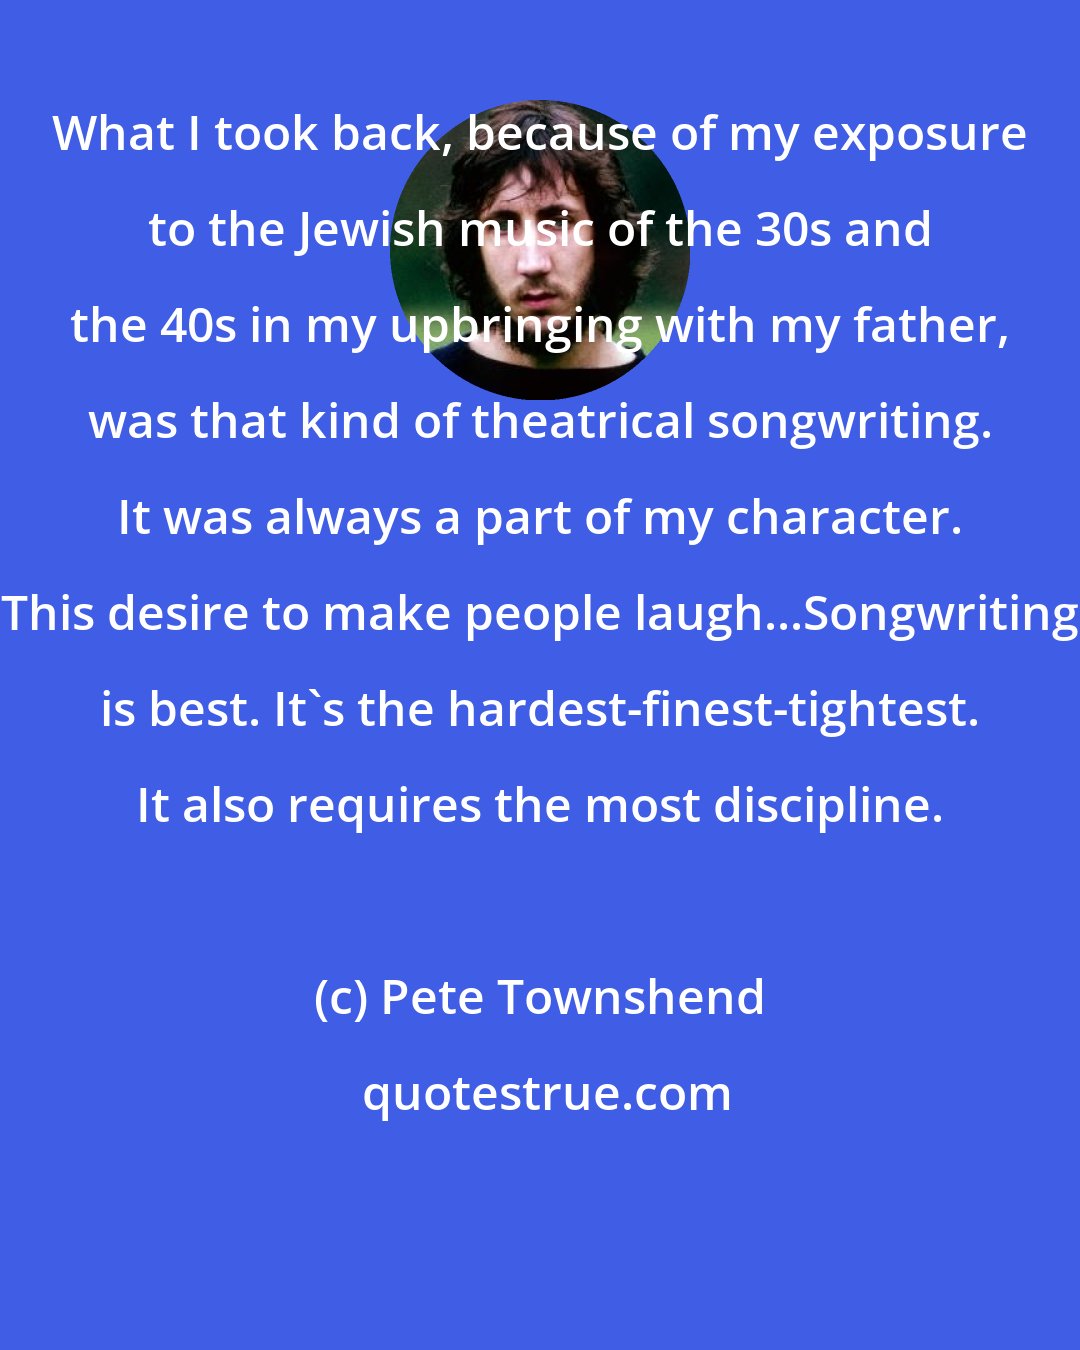 Pete Townshend: What I took back, because of my exposure to the Jewish music of the 30s and the 40s in my upbringing with my father, was that kind of theatrical songwriting. It was always a part of my character. This desire to make people laugh...Songwriting is best. It's the hardest-finest-tightest. It also requires the most discipline.